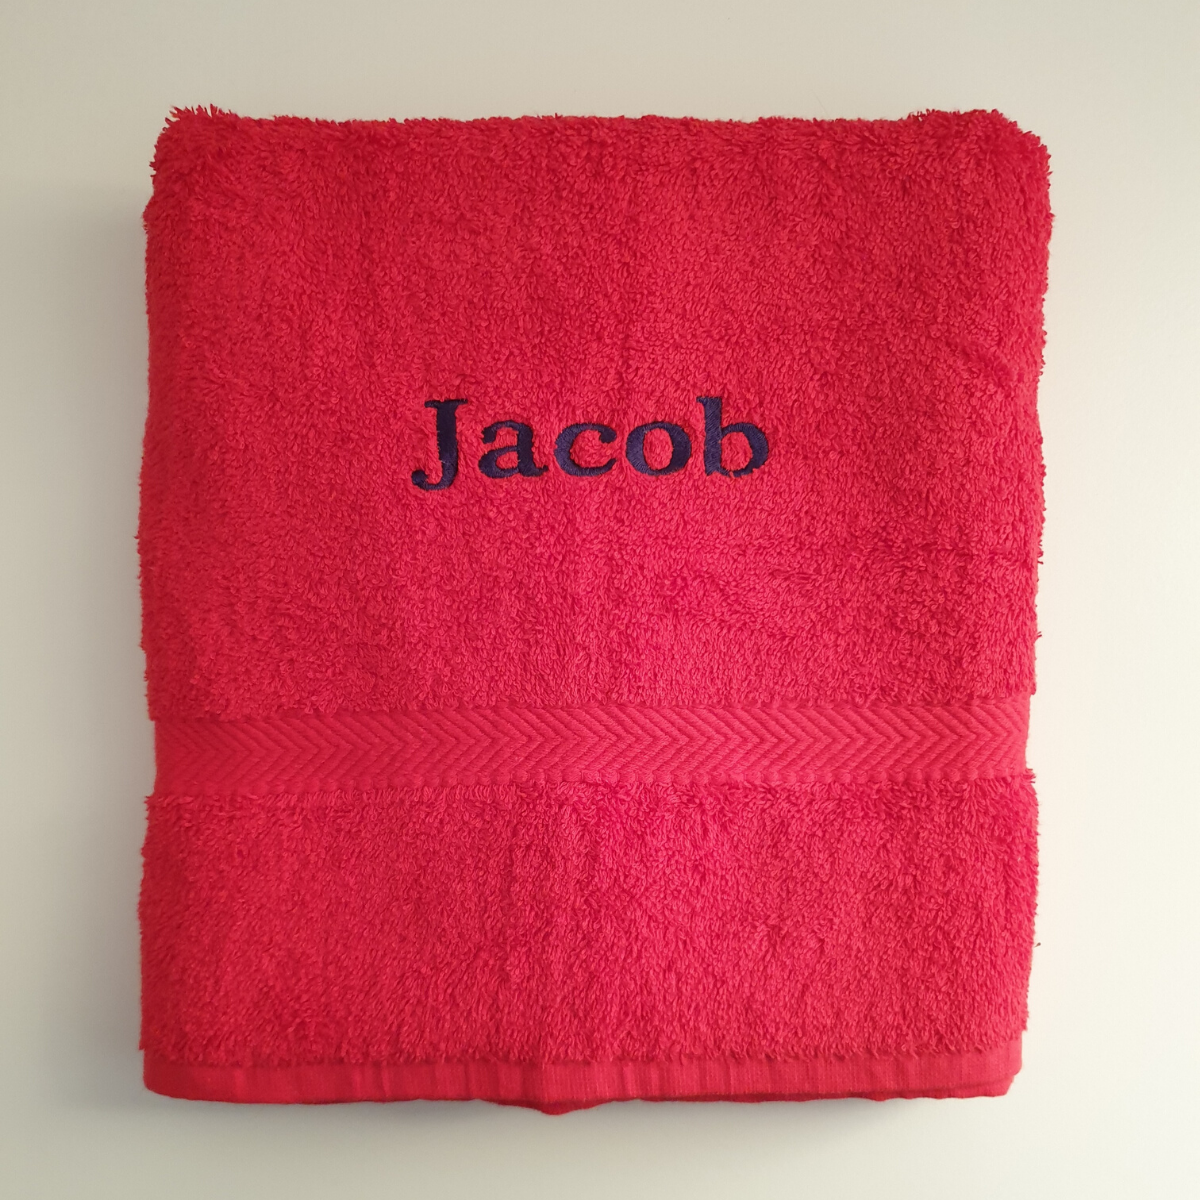 Personalised towel for holidays, swimming lessons, sports, camping trips and more. Made from 100% super soft cotton which is super absorbant, the towel measures approximately 70 cm by 130 cm. The towels are available in ed,r navy, white, slate, fuchsia, pale pink and purple with a wide range of colour options for the name.